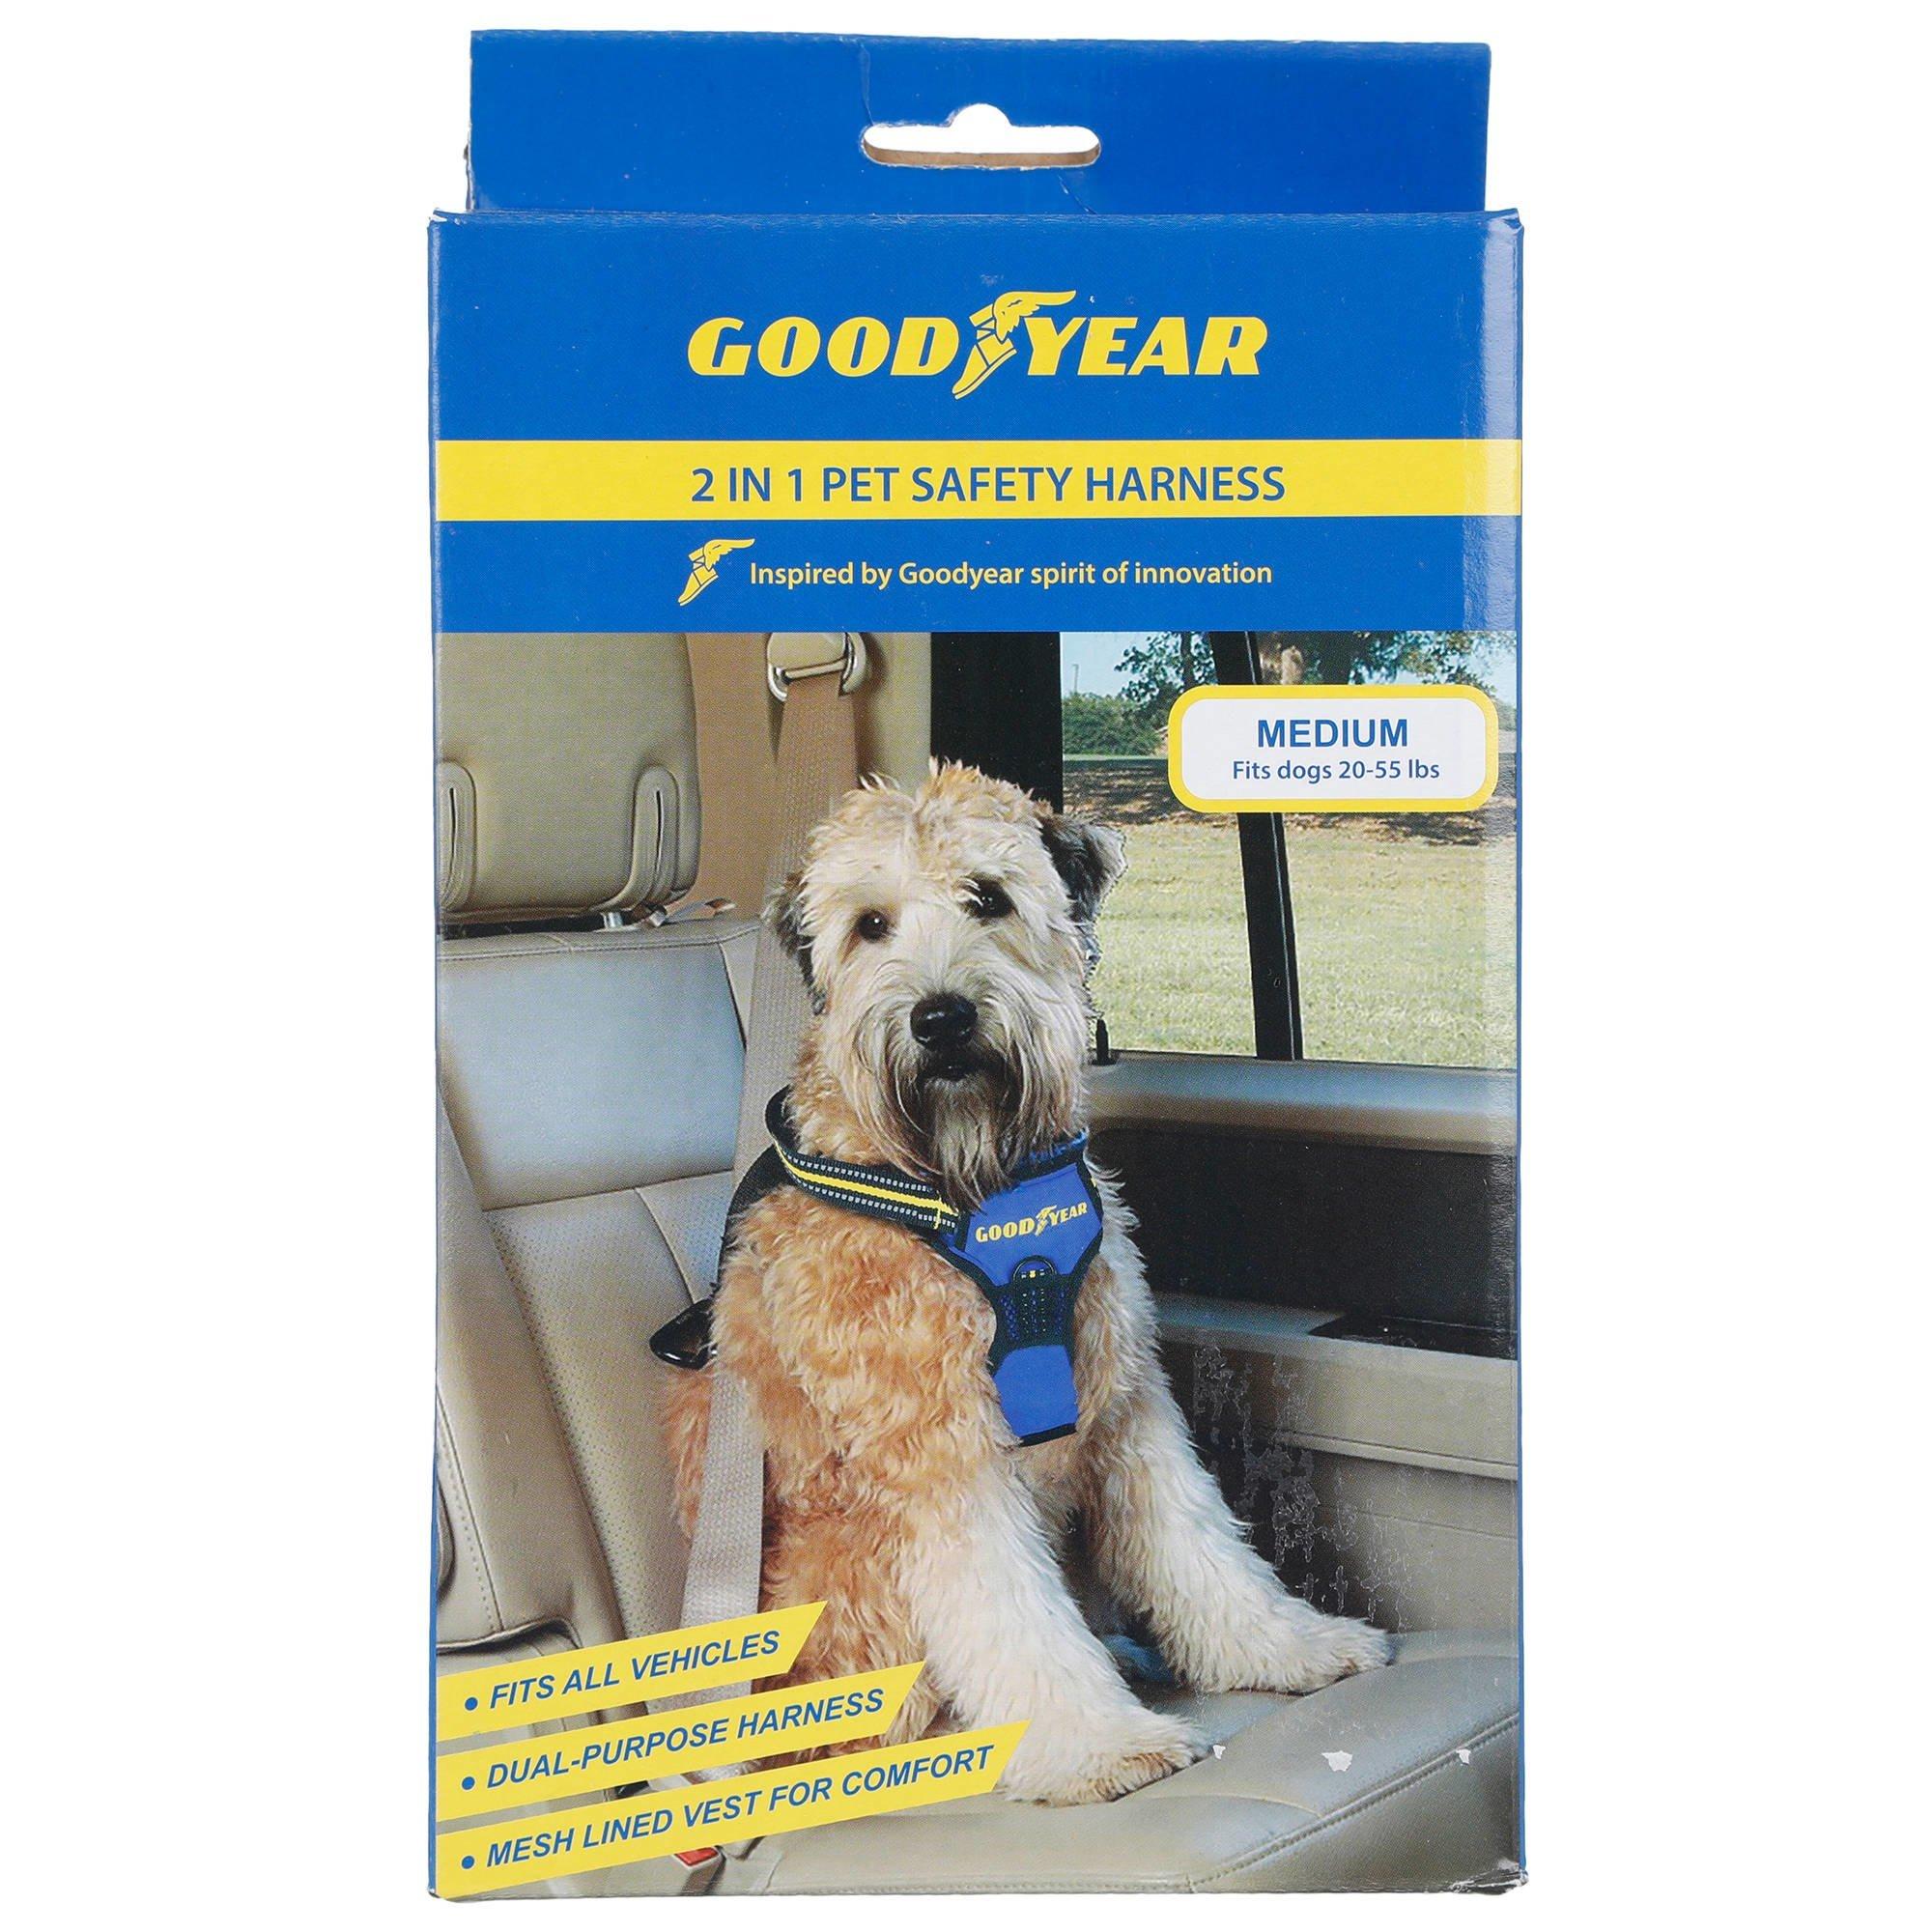 2-In-1 Pet Safety Harness | Burkes Outlet